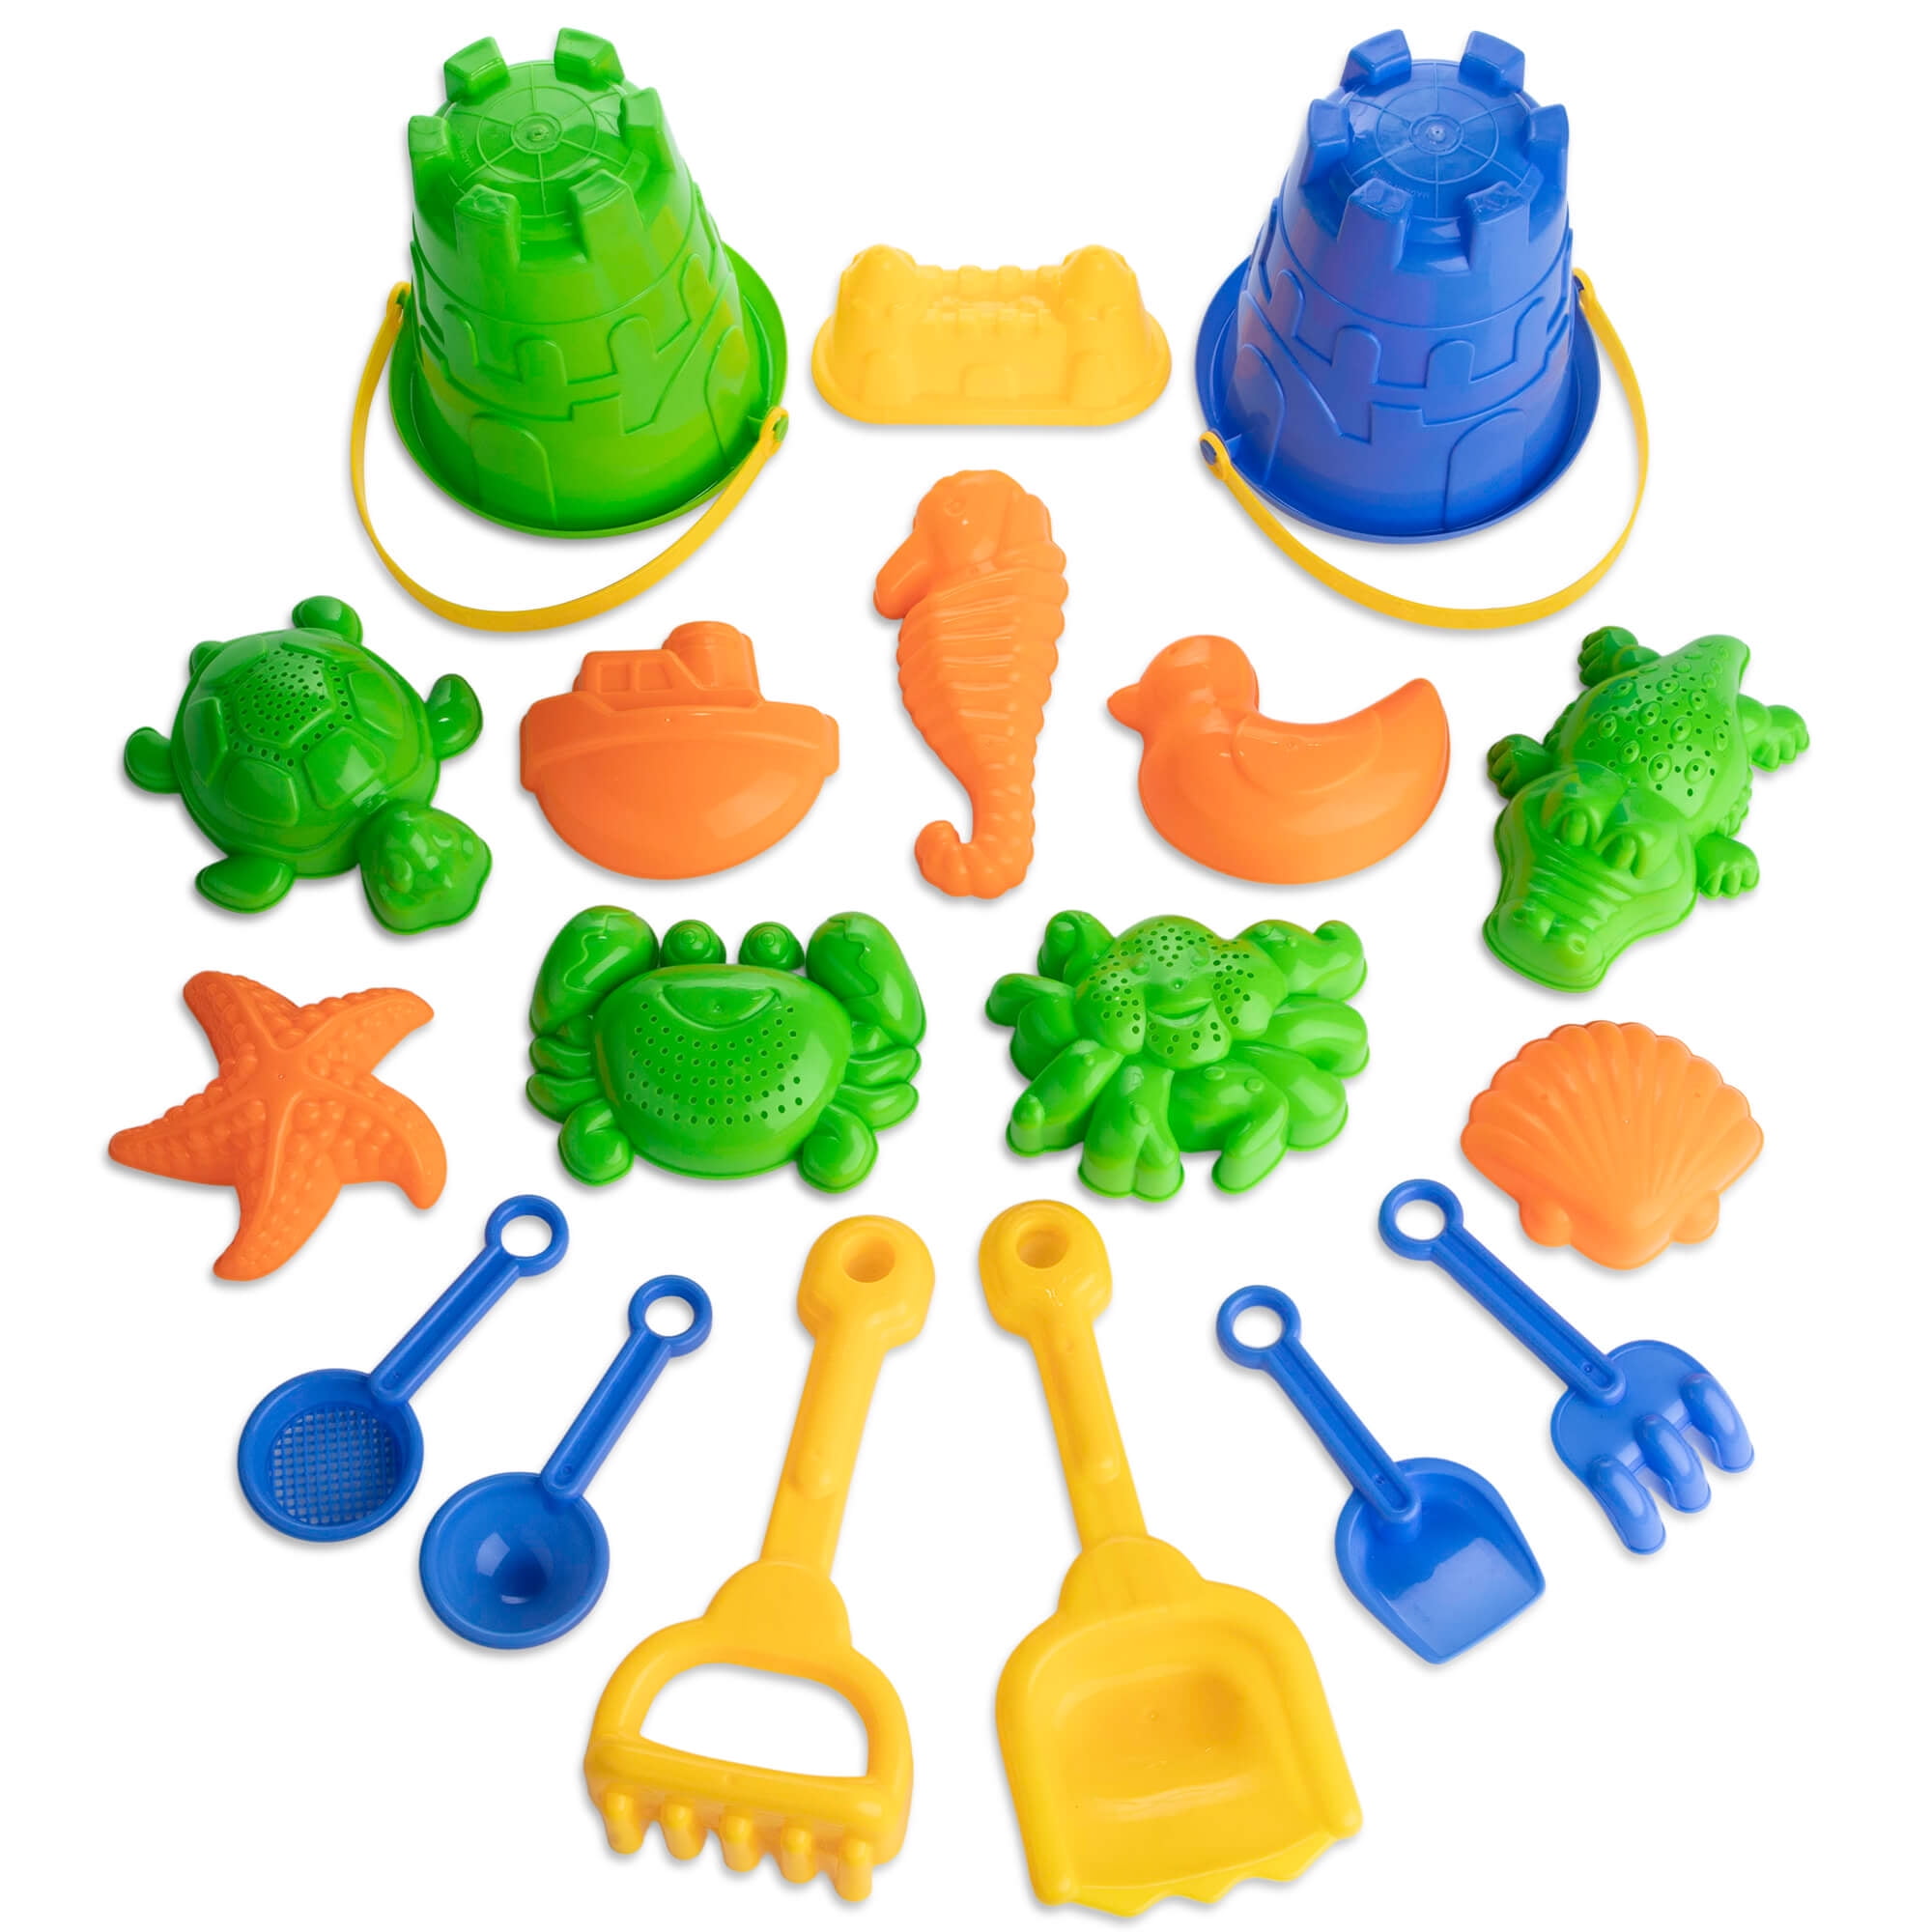 N A Beach Bucket Toys Silicone Sand Buckets Toy Set with Shovel and 4PCS Molds Summer Beach Toys for Toddlers